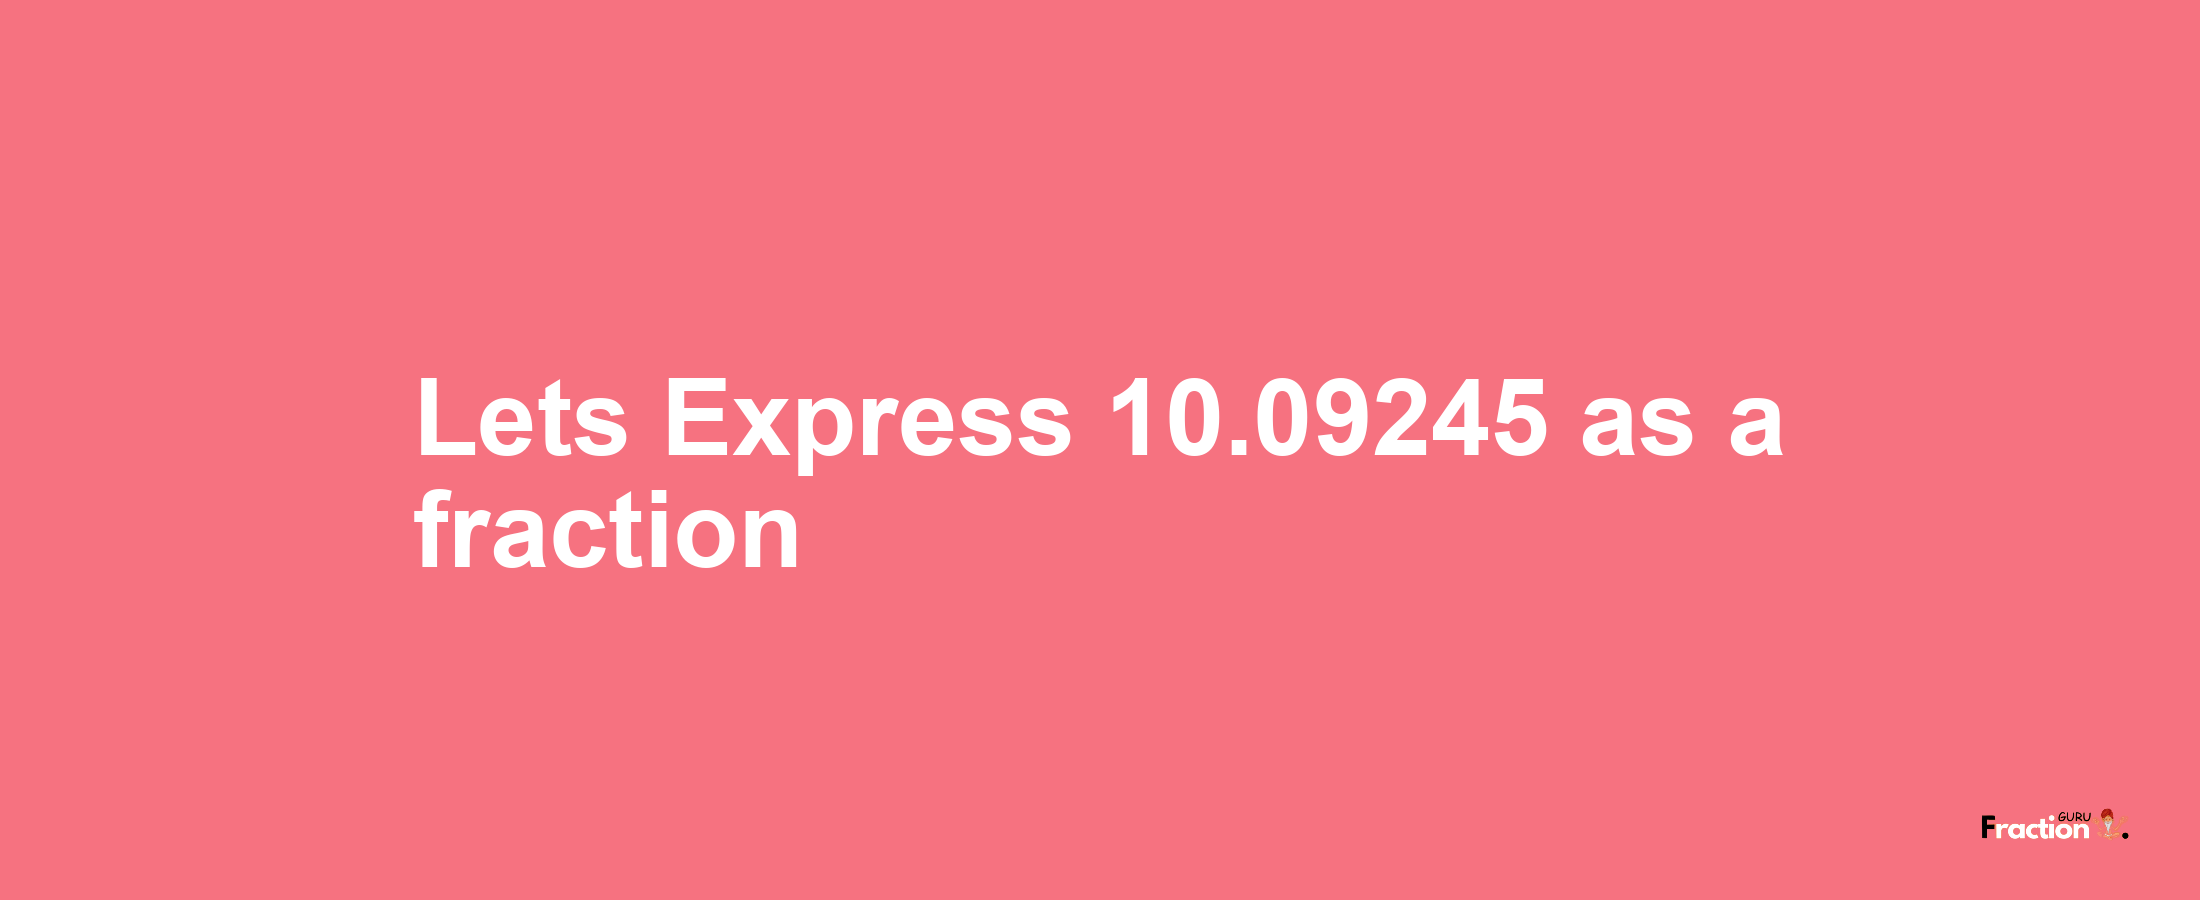 Lets Express 10.09245 as afraction